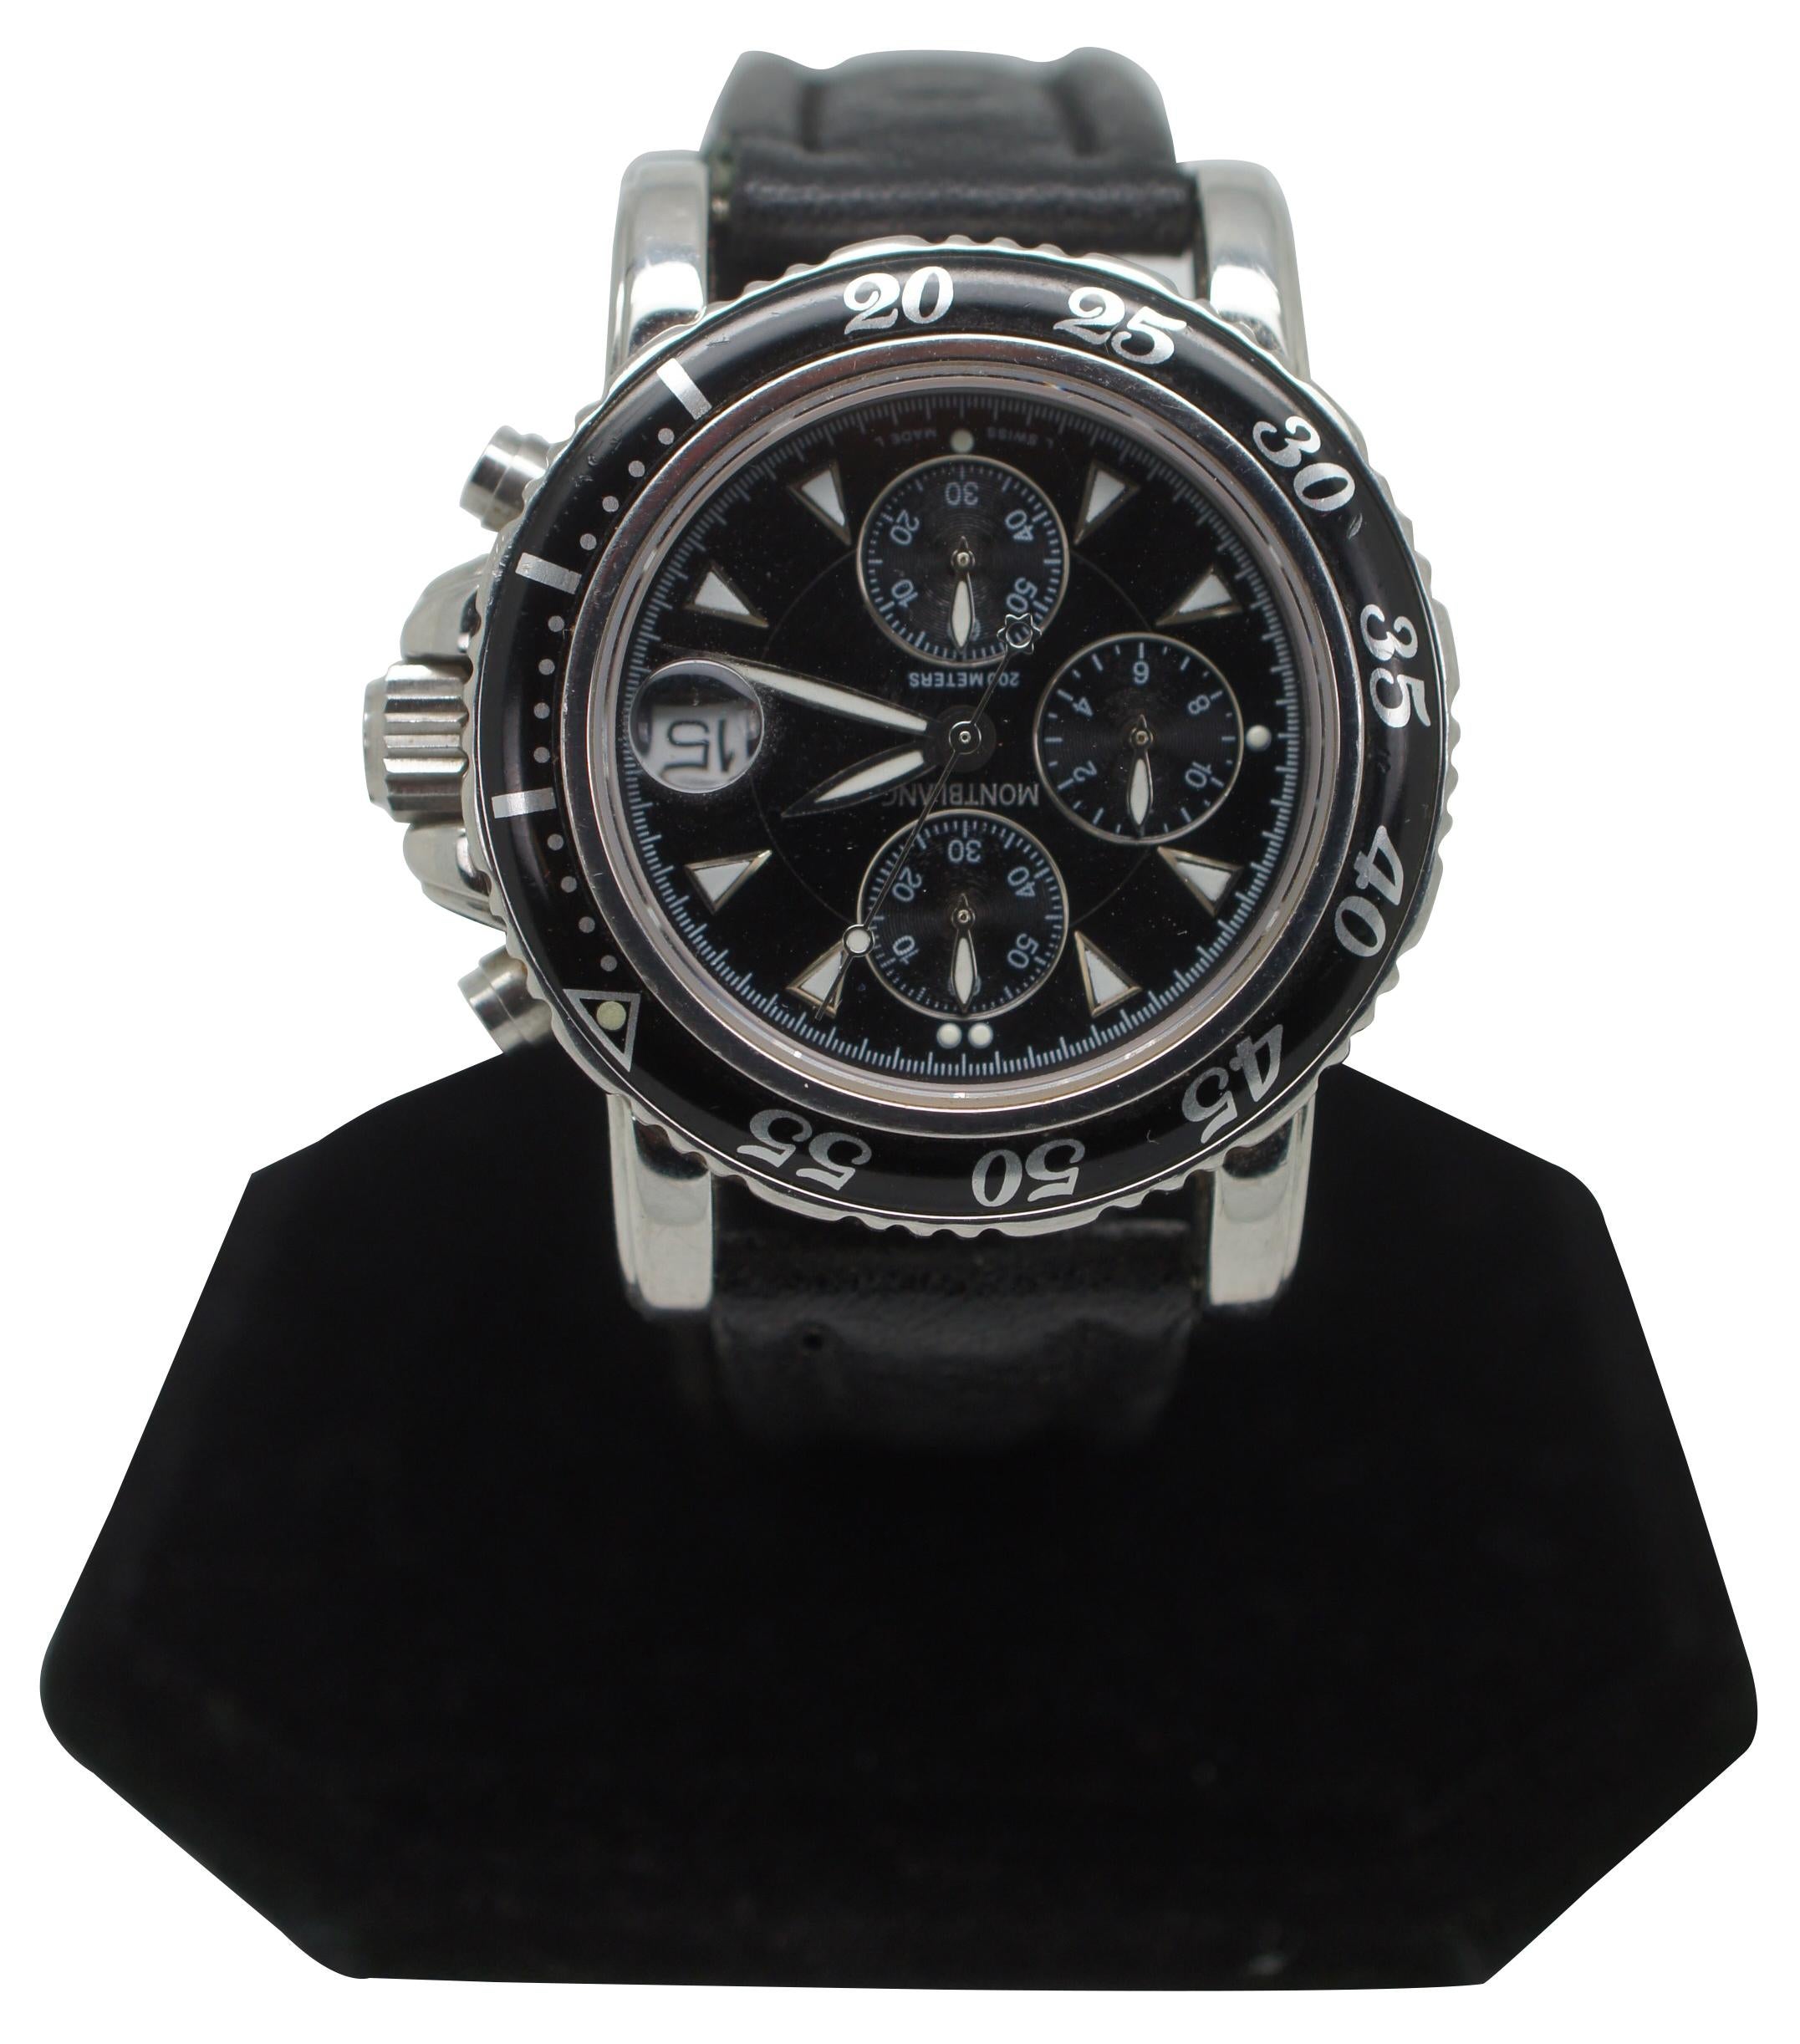 Montblanc Meisterstuck Sport chronograph wristwatch model 7037-PL78948. Features a stainless steel case trimmed in black, water resistant 200 meters. Genuine black leather band and an unused spare. Measure: 41mm. 

Band - 8.5” to 7.25” x 0.75” /